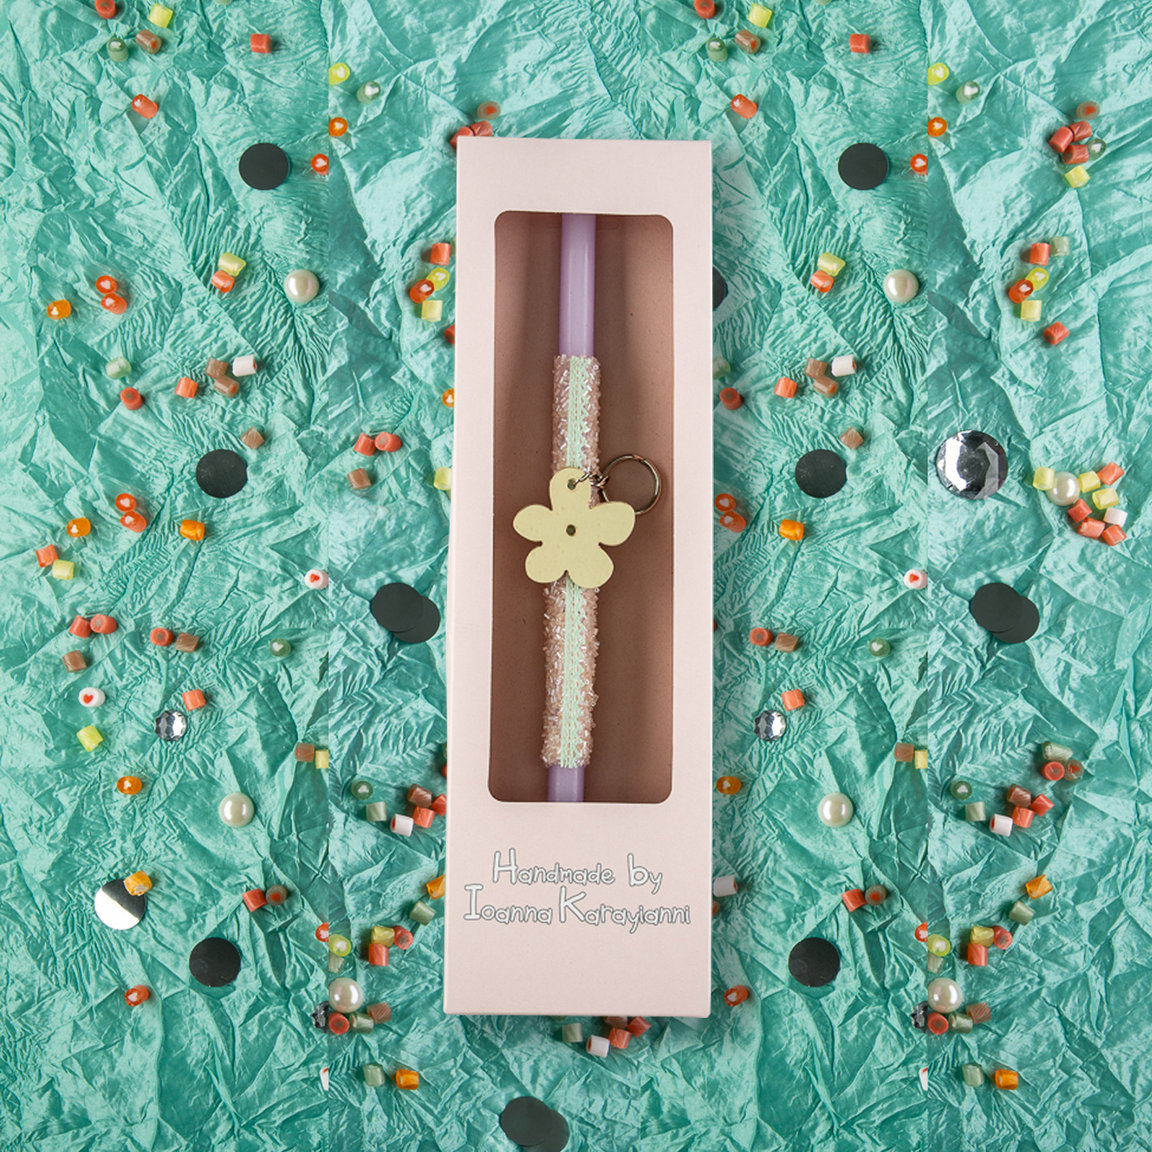 Handmade Easter candle with plexiglass daisy keyring